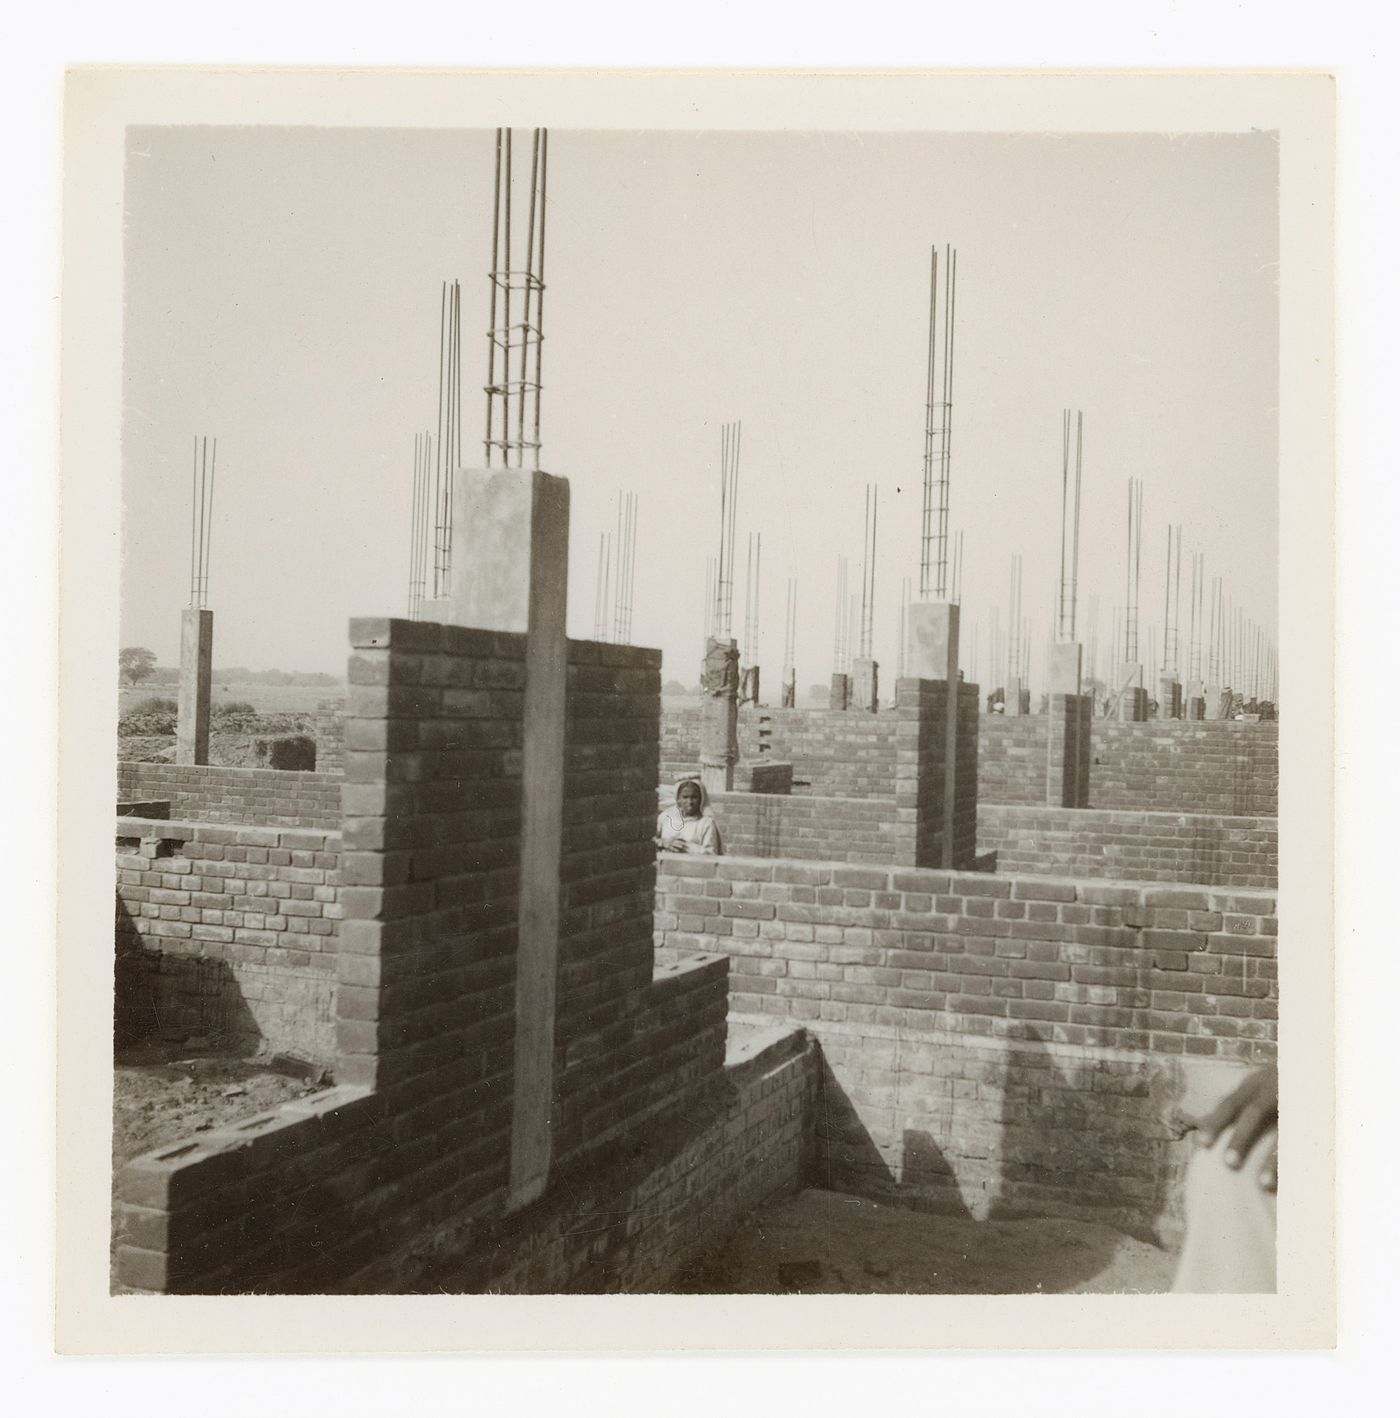 View of brick and concrete buildings under construction with worker in background, Chandigarh, India